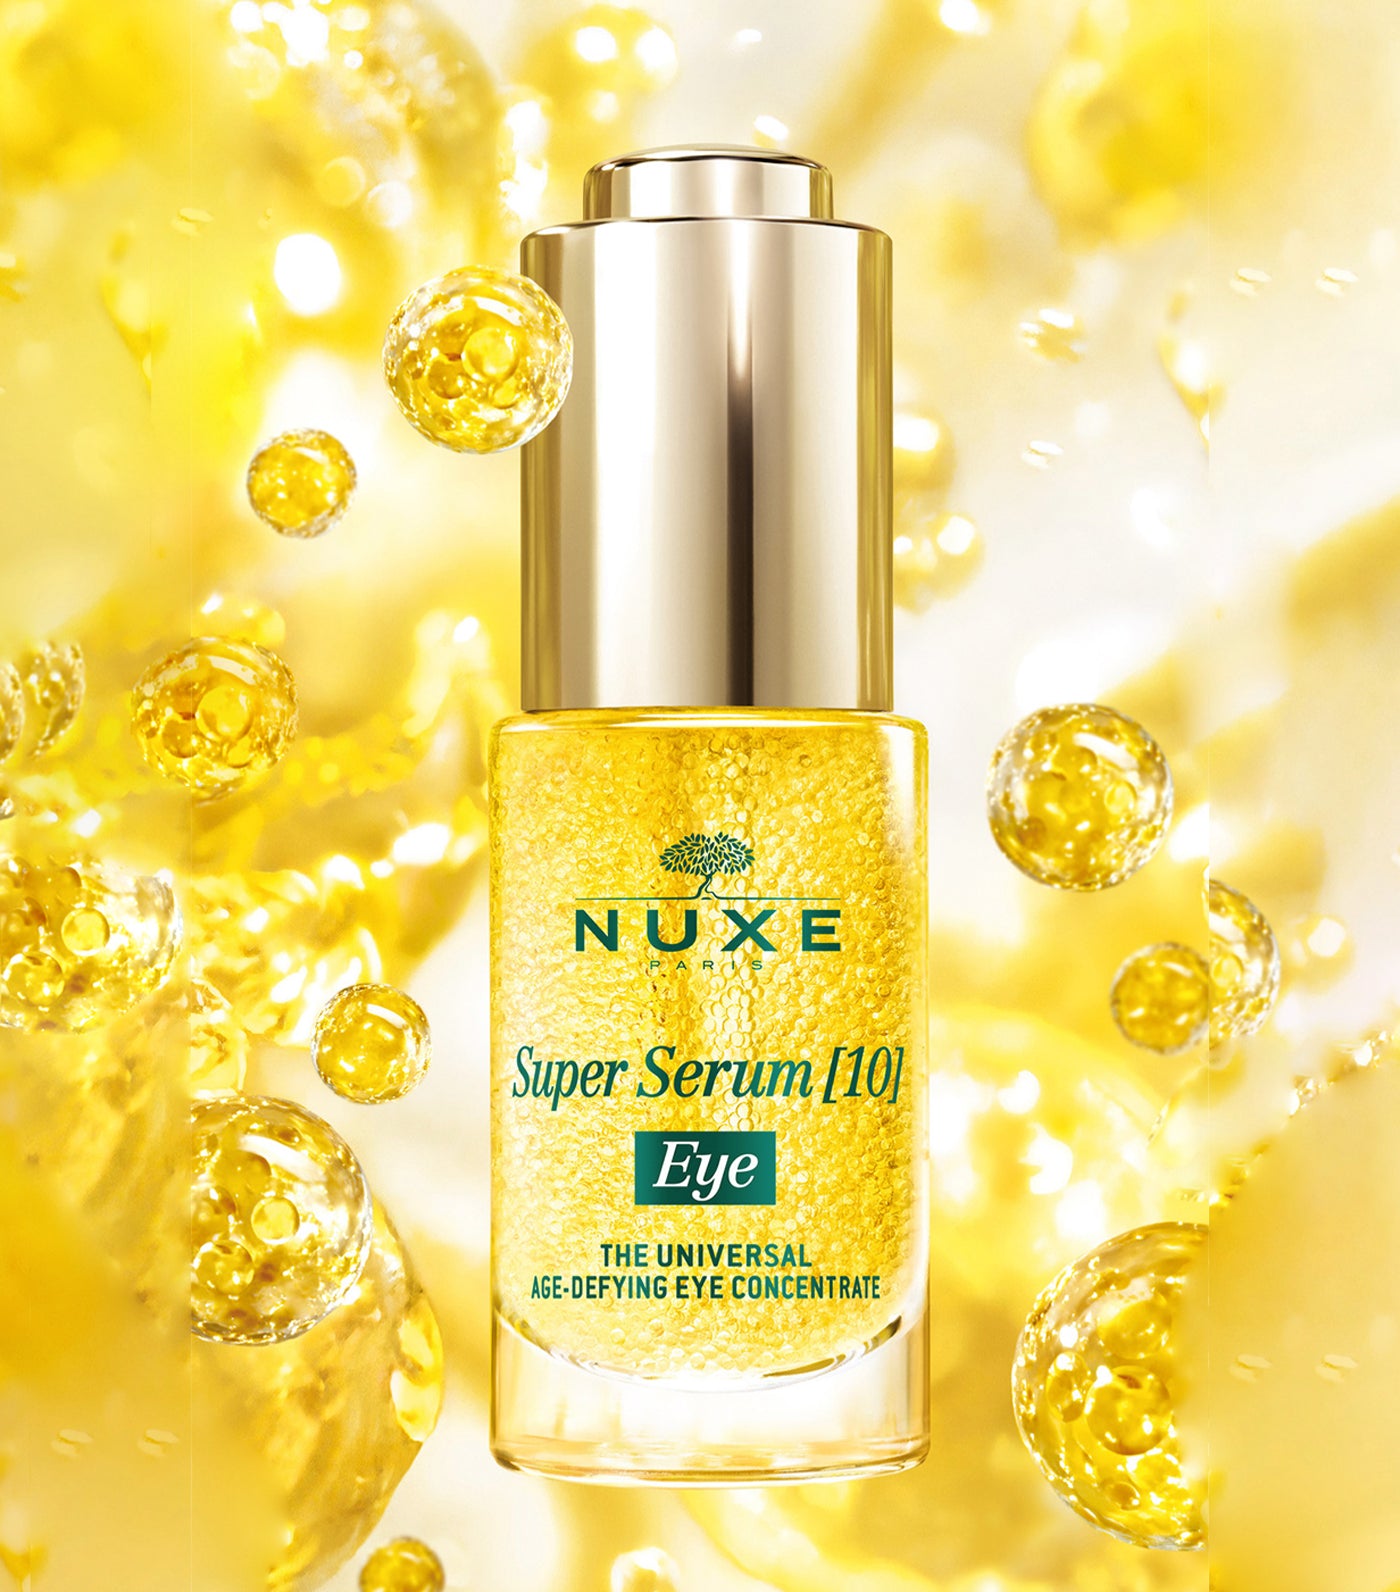 Super Serum [10] Eye, The Universal Age-defying Eye Concentrate